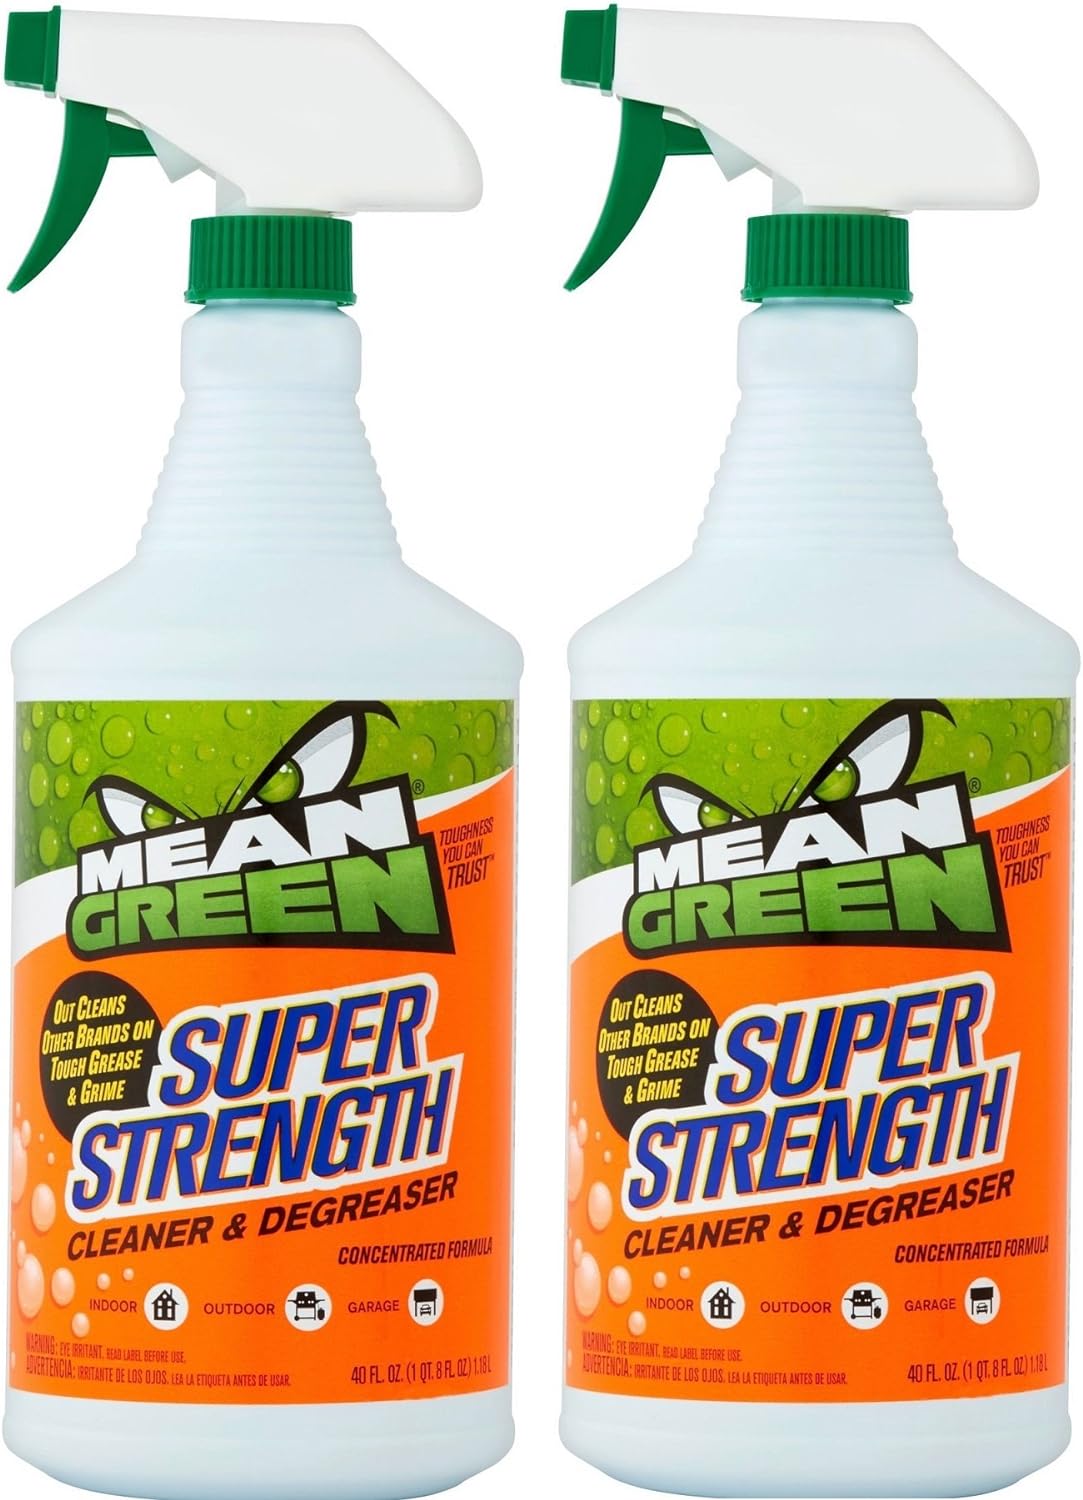 2 PACK Mean Green Super Strength Cleaner and Degreaser, 40 fl oz each : Health & Household